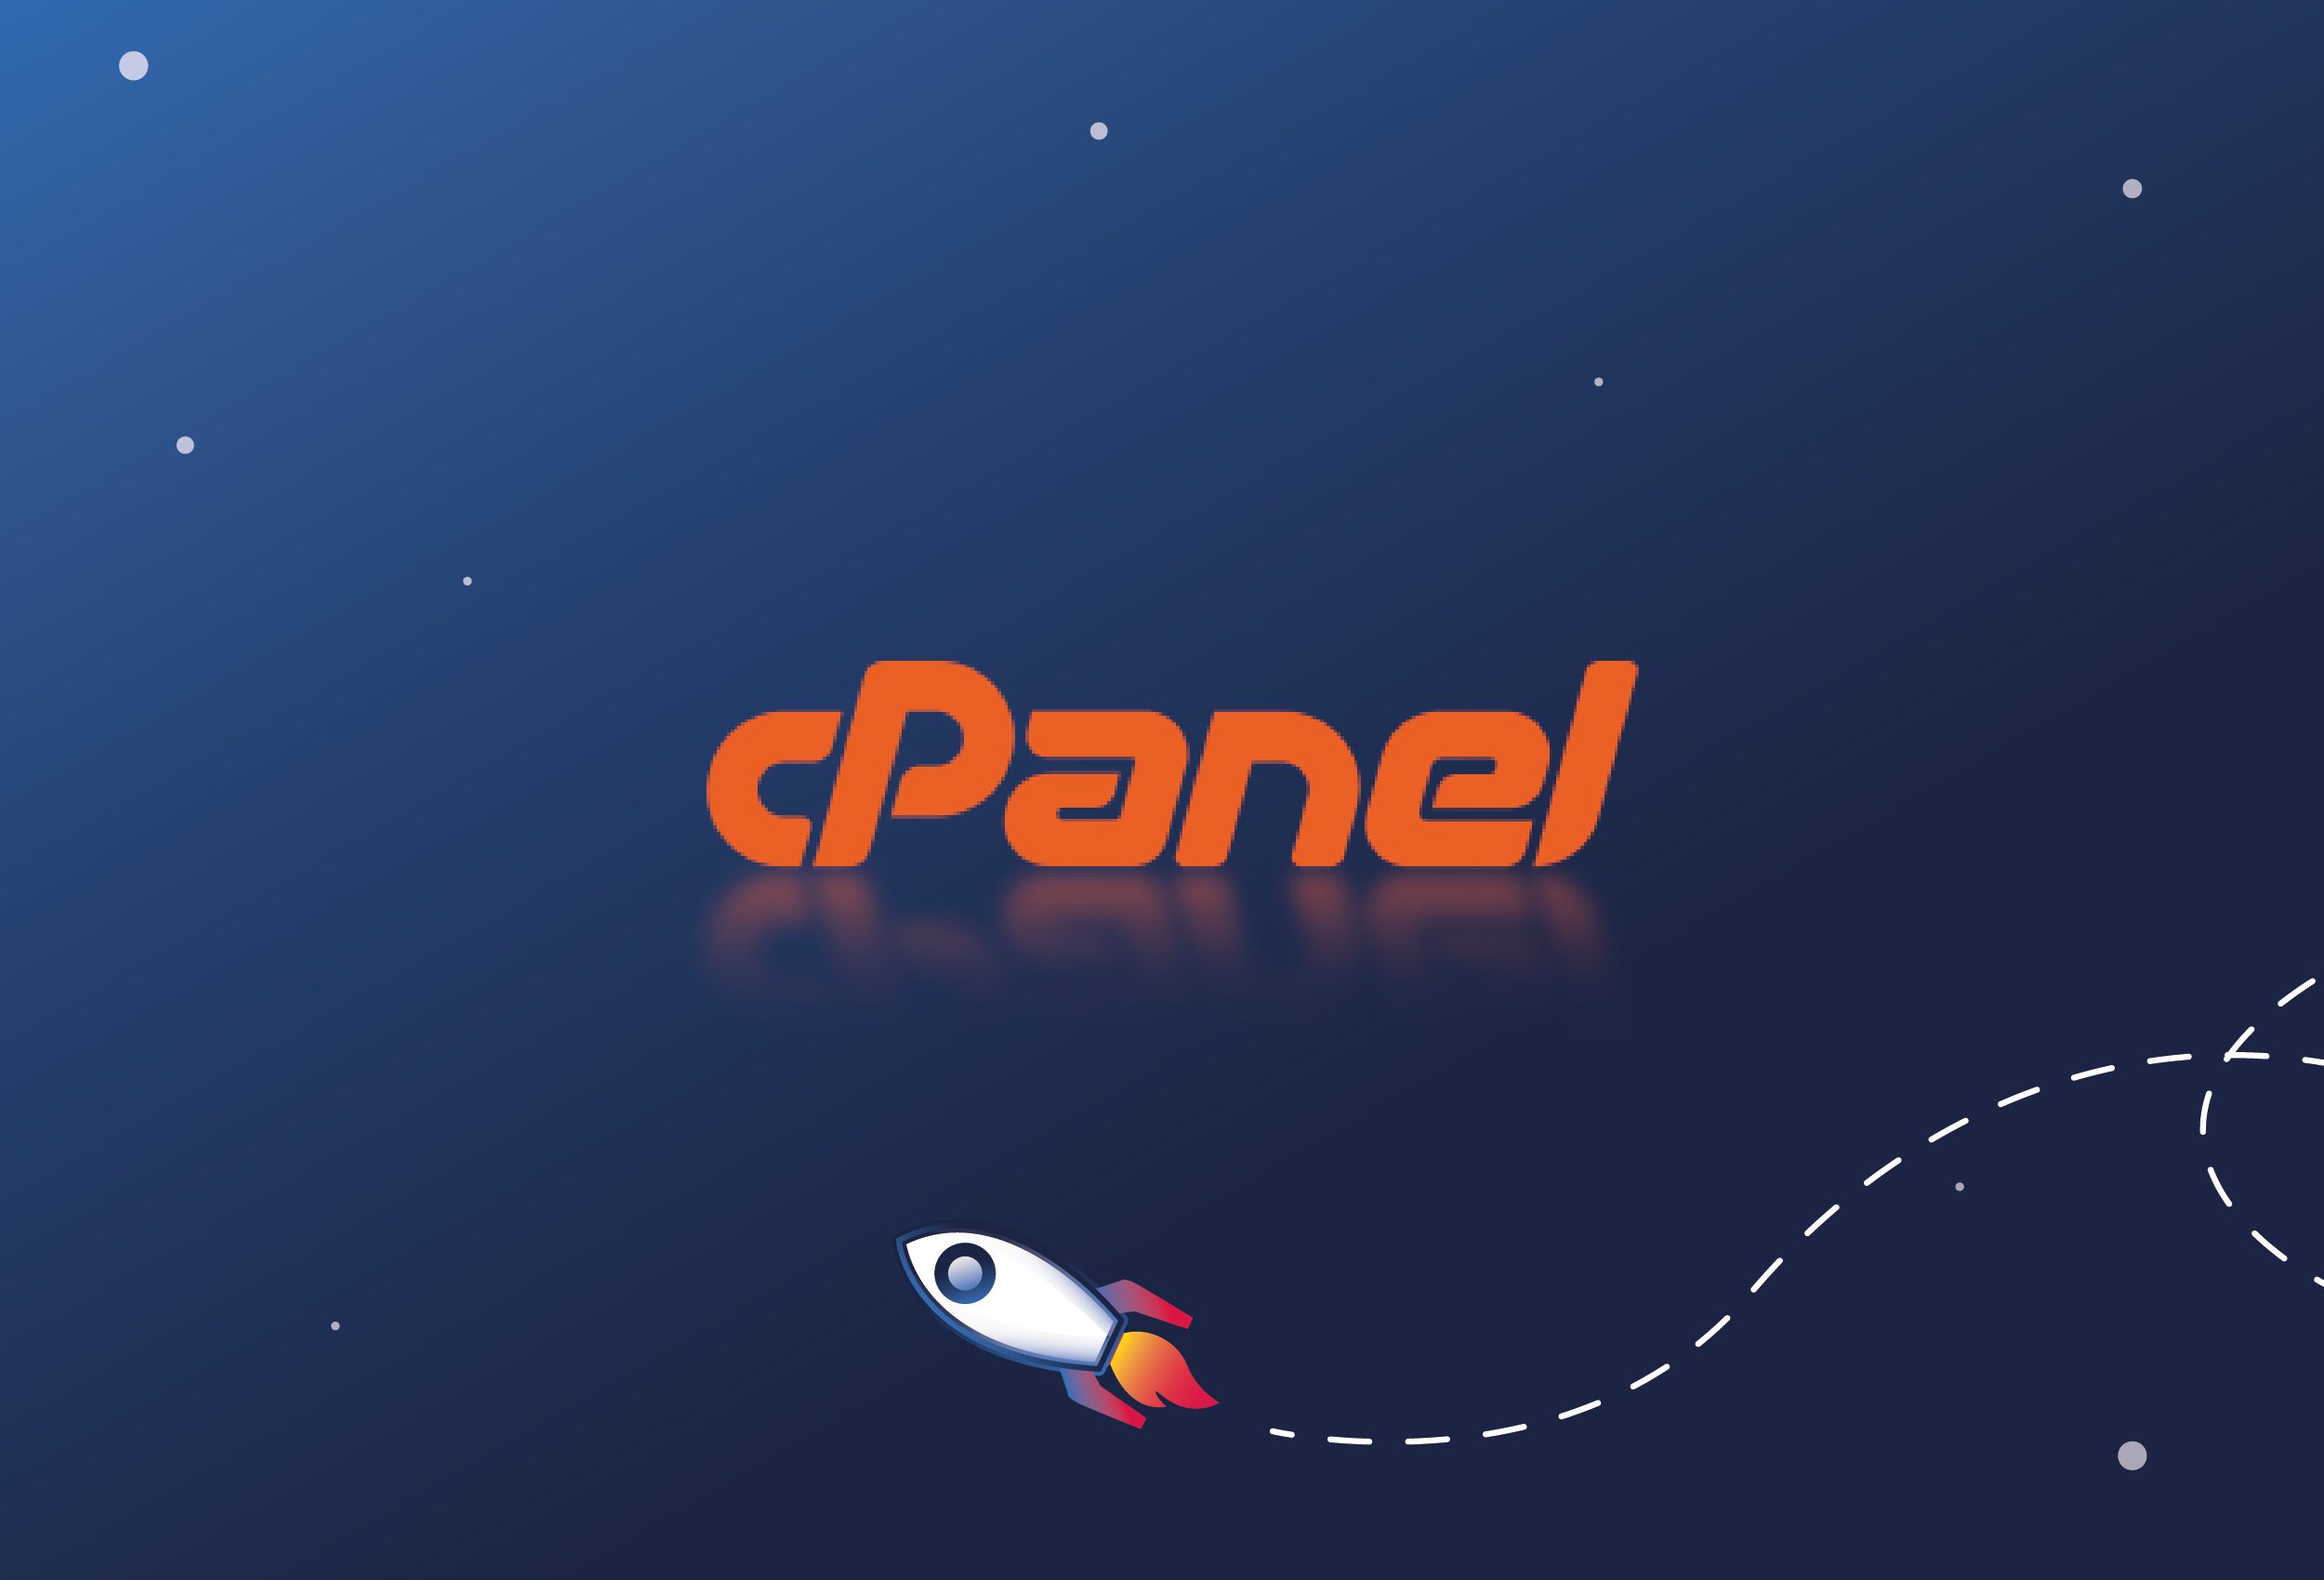 cPanel Price Increases Again In 2020. What You Need To Know.